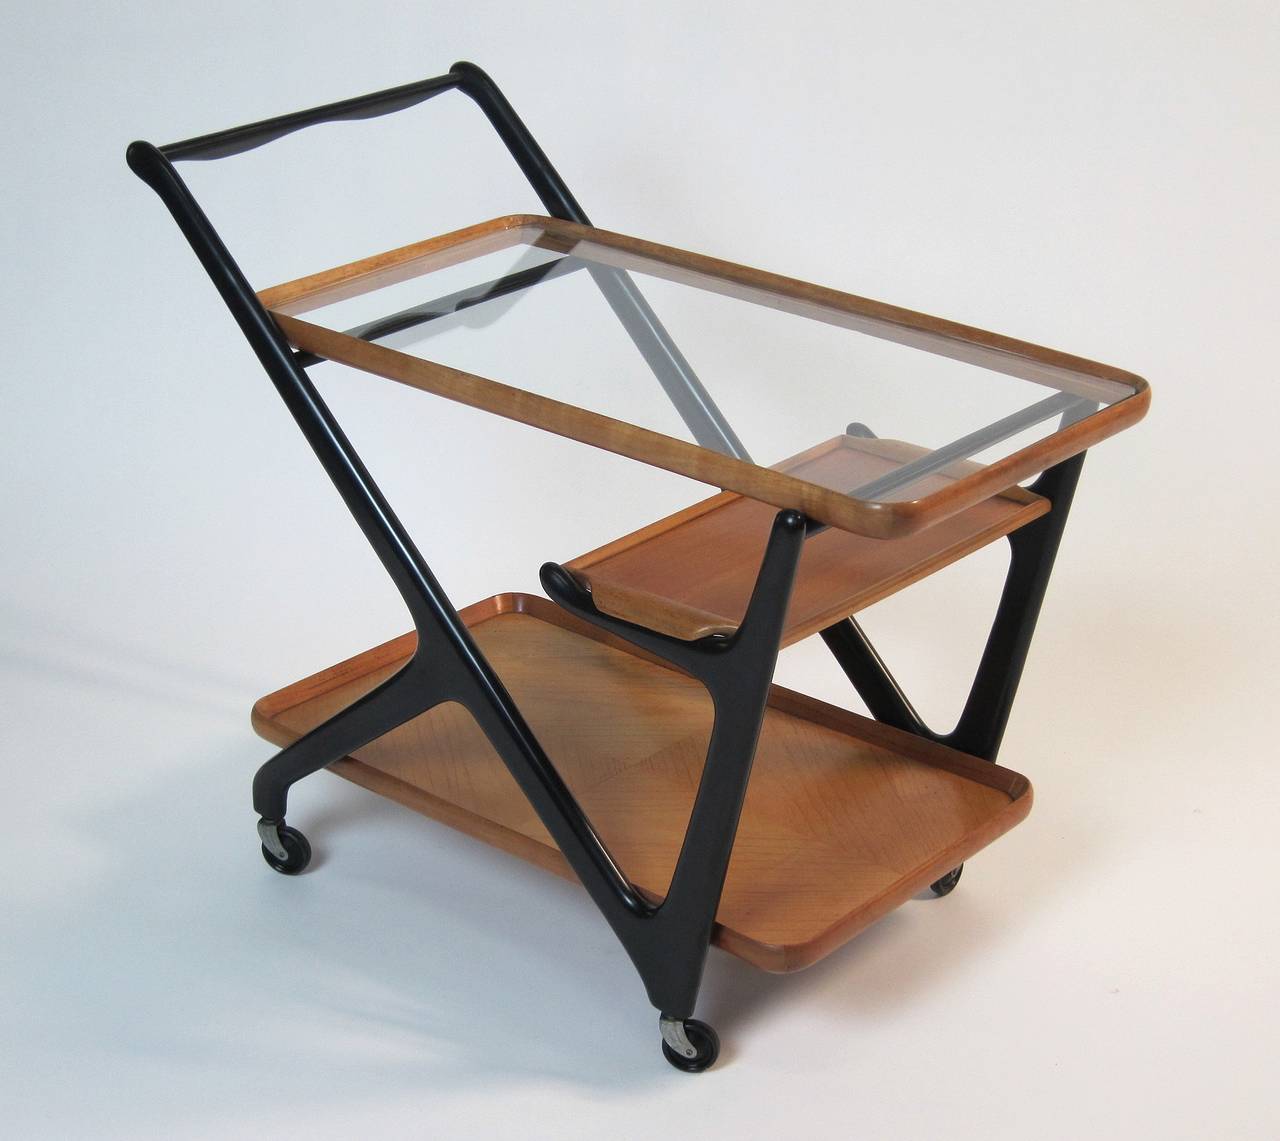 Manufactured in Italy 1950s, this organic wooden trolley includes a small serving tray, top with new glass (original existing).